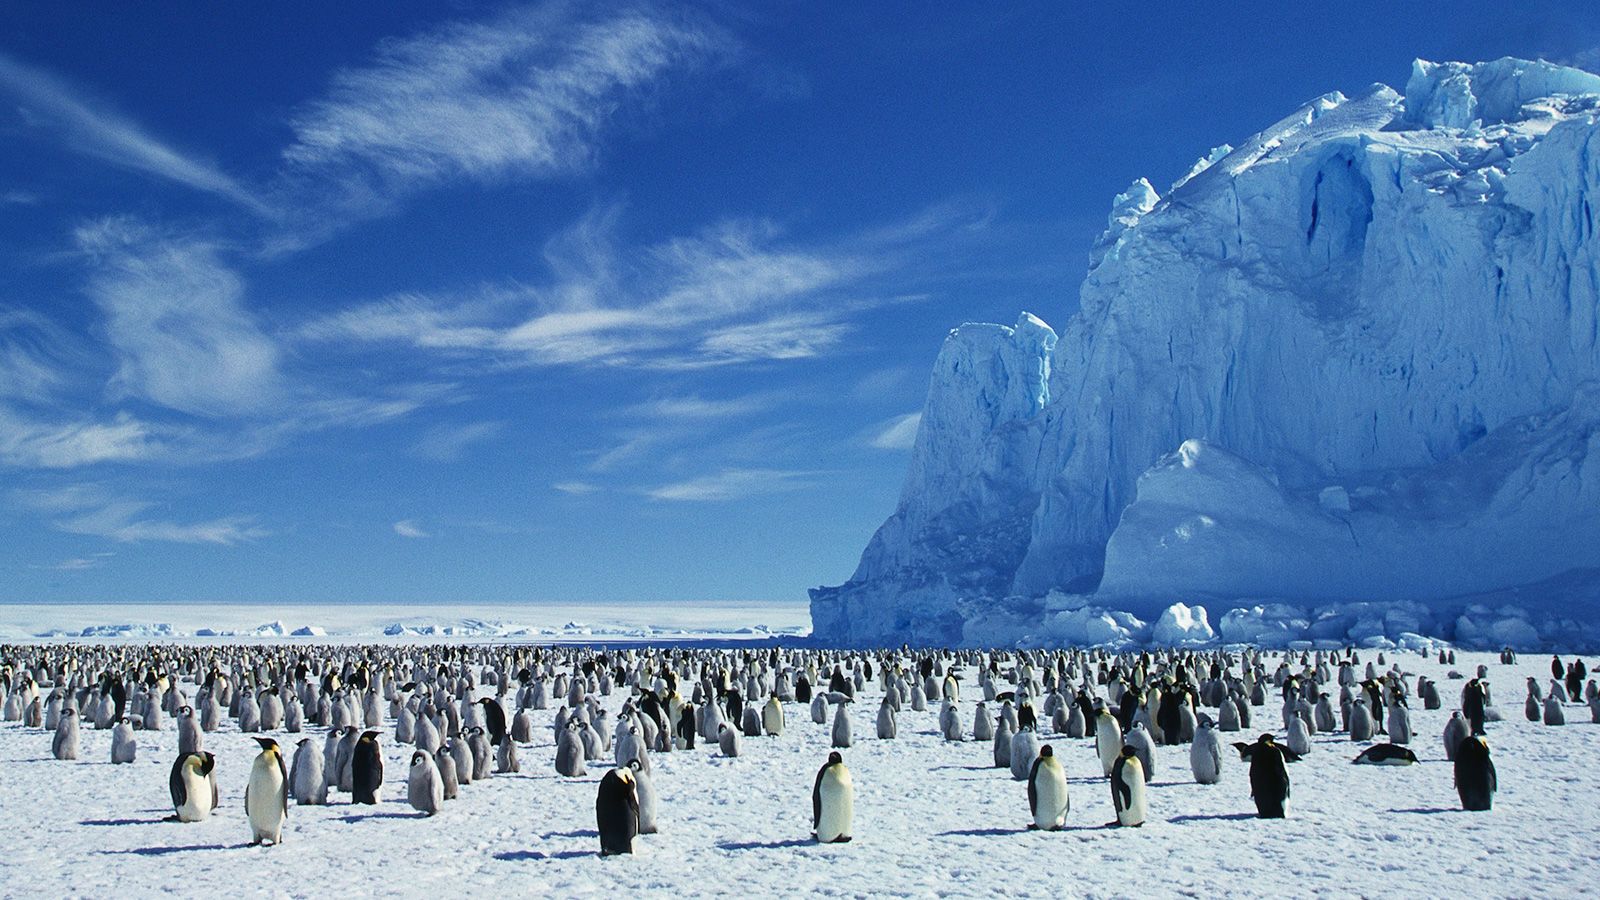 Emperor penguins at risk of extinction due to climate crisis